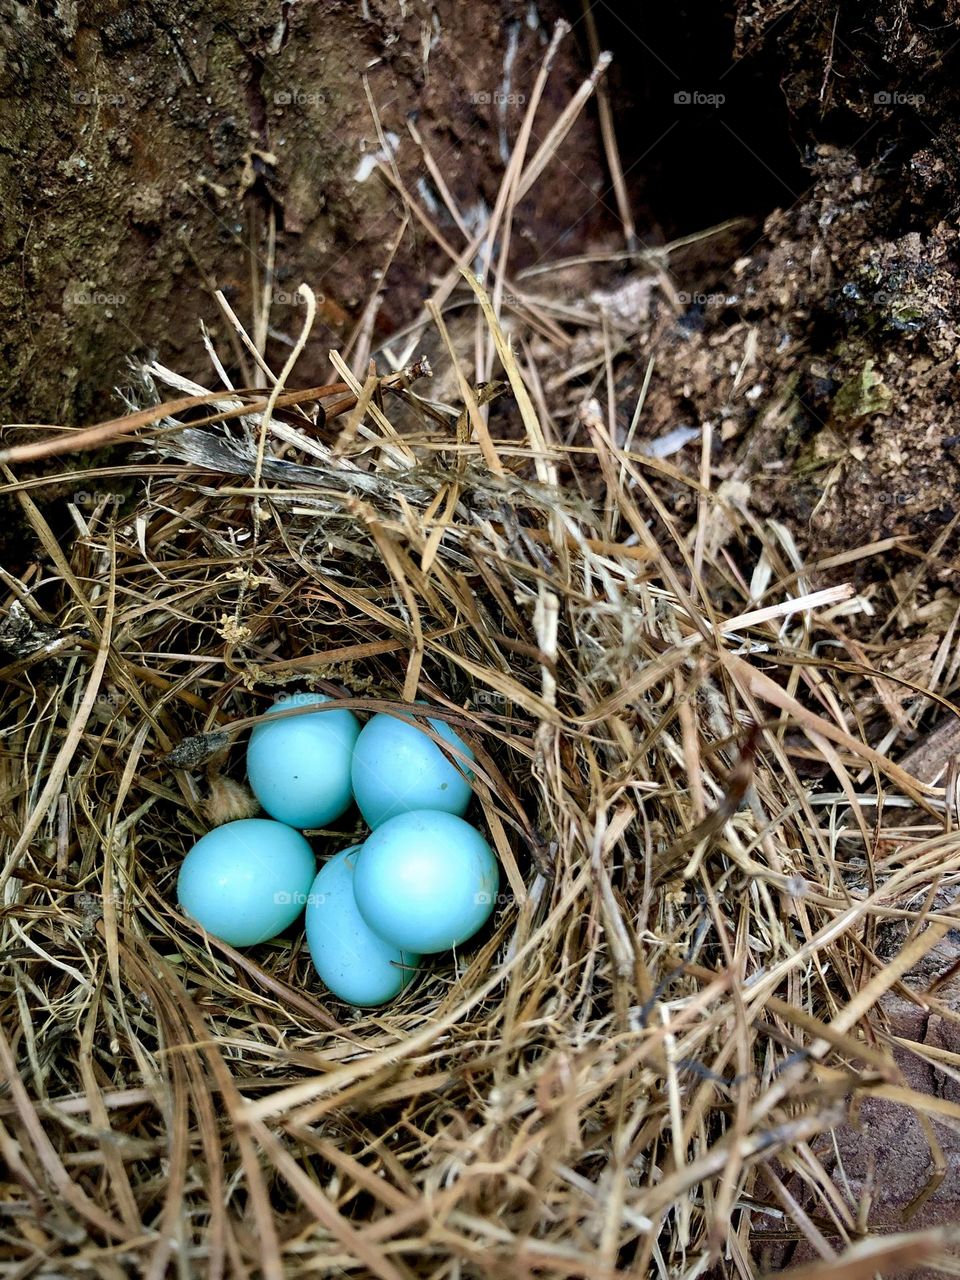 A clutch of blue bluebird eggs in a nest of straw. The circle of life continues in spring 